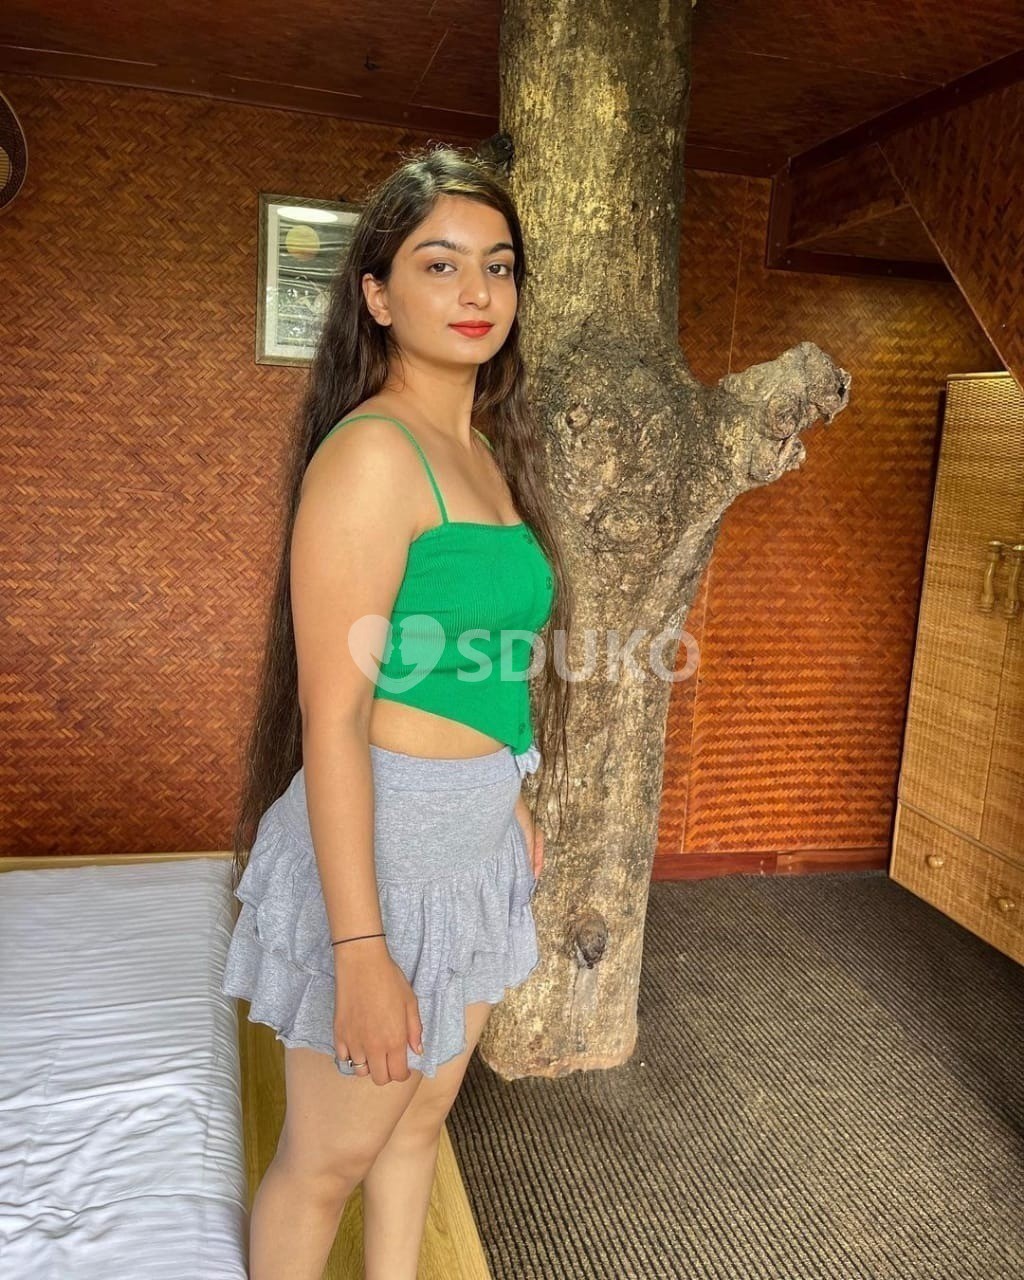 Special dwarka ♥️ professional independent kavya escort top college girl provide call girl service .......?